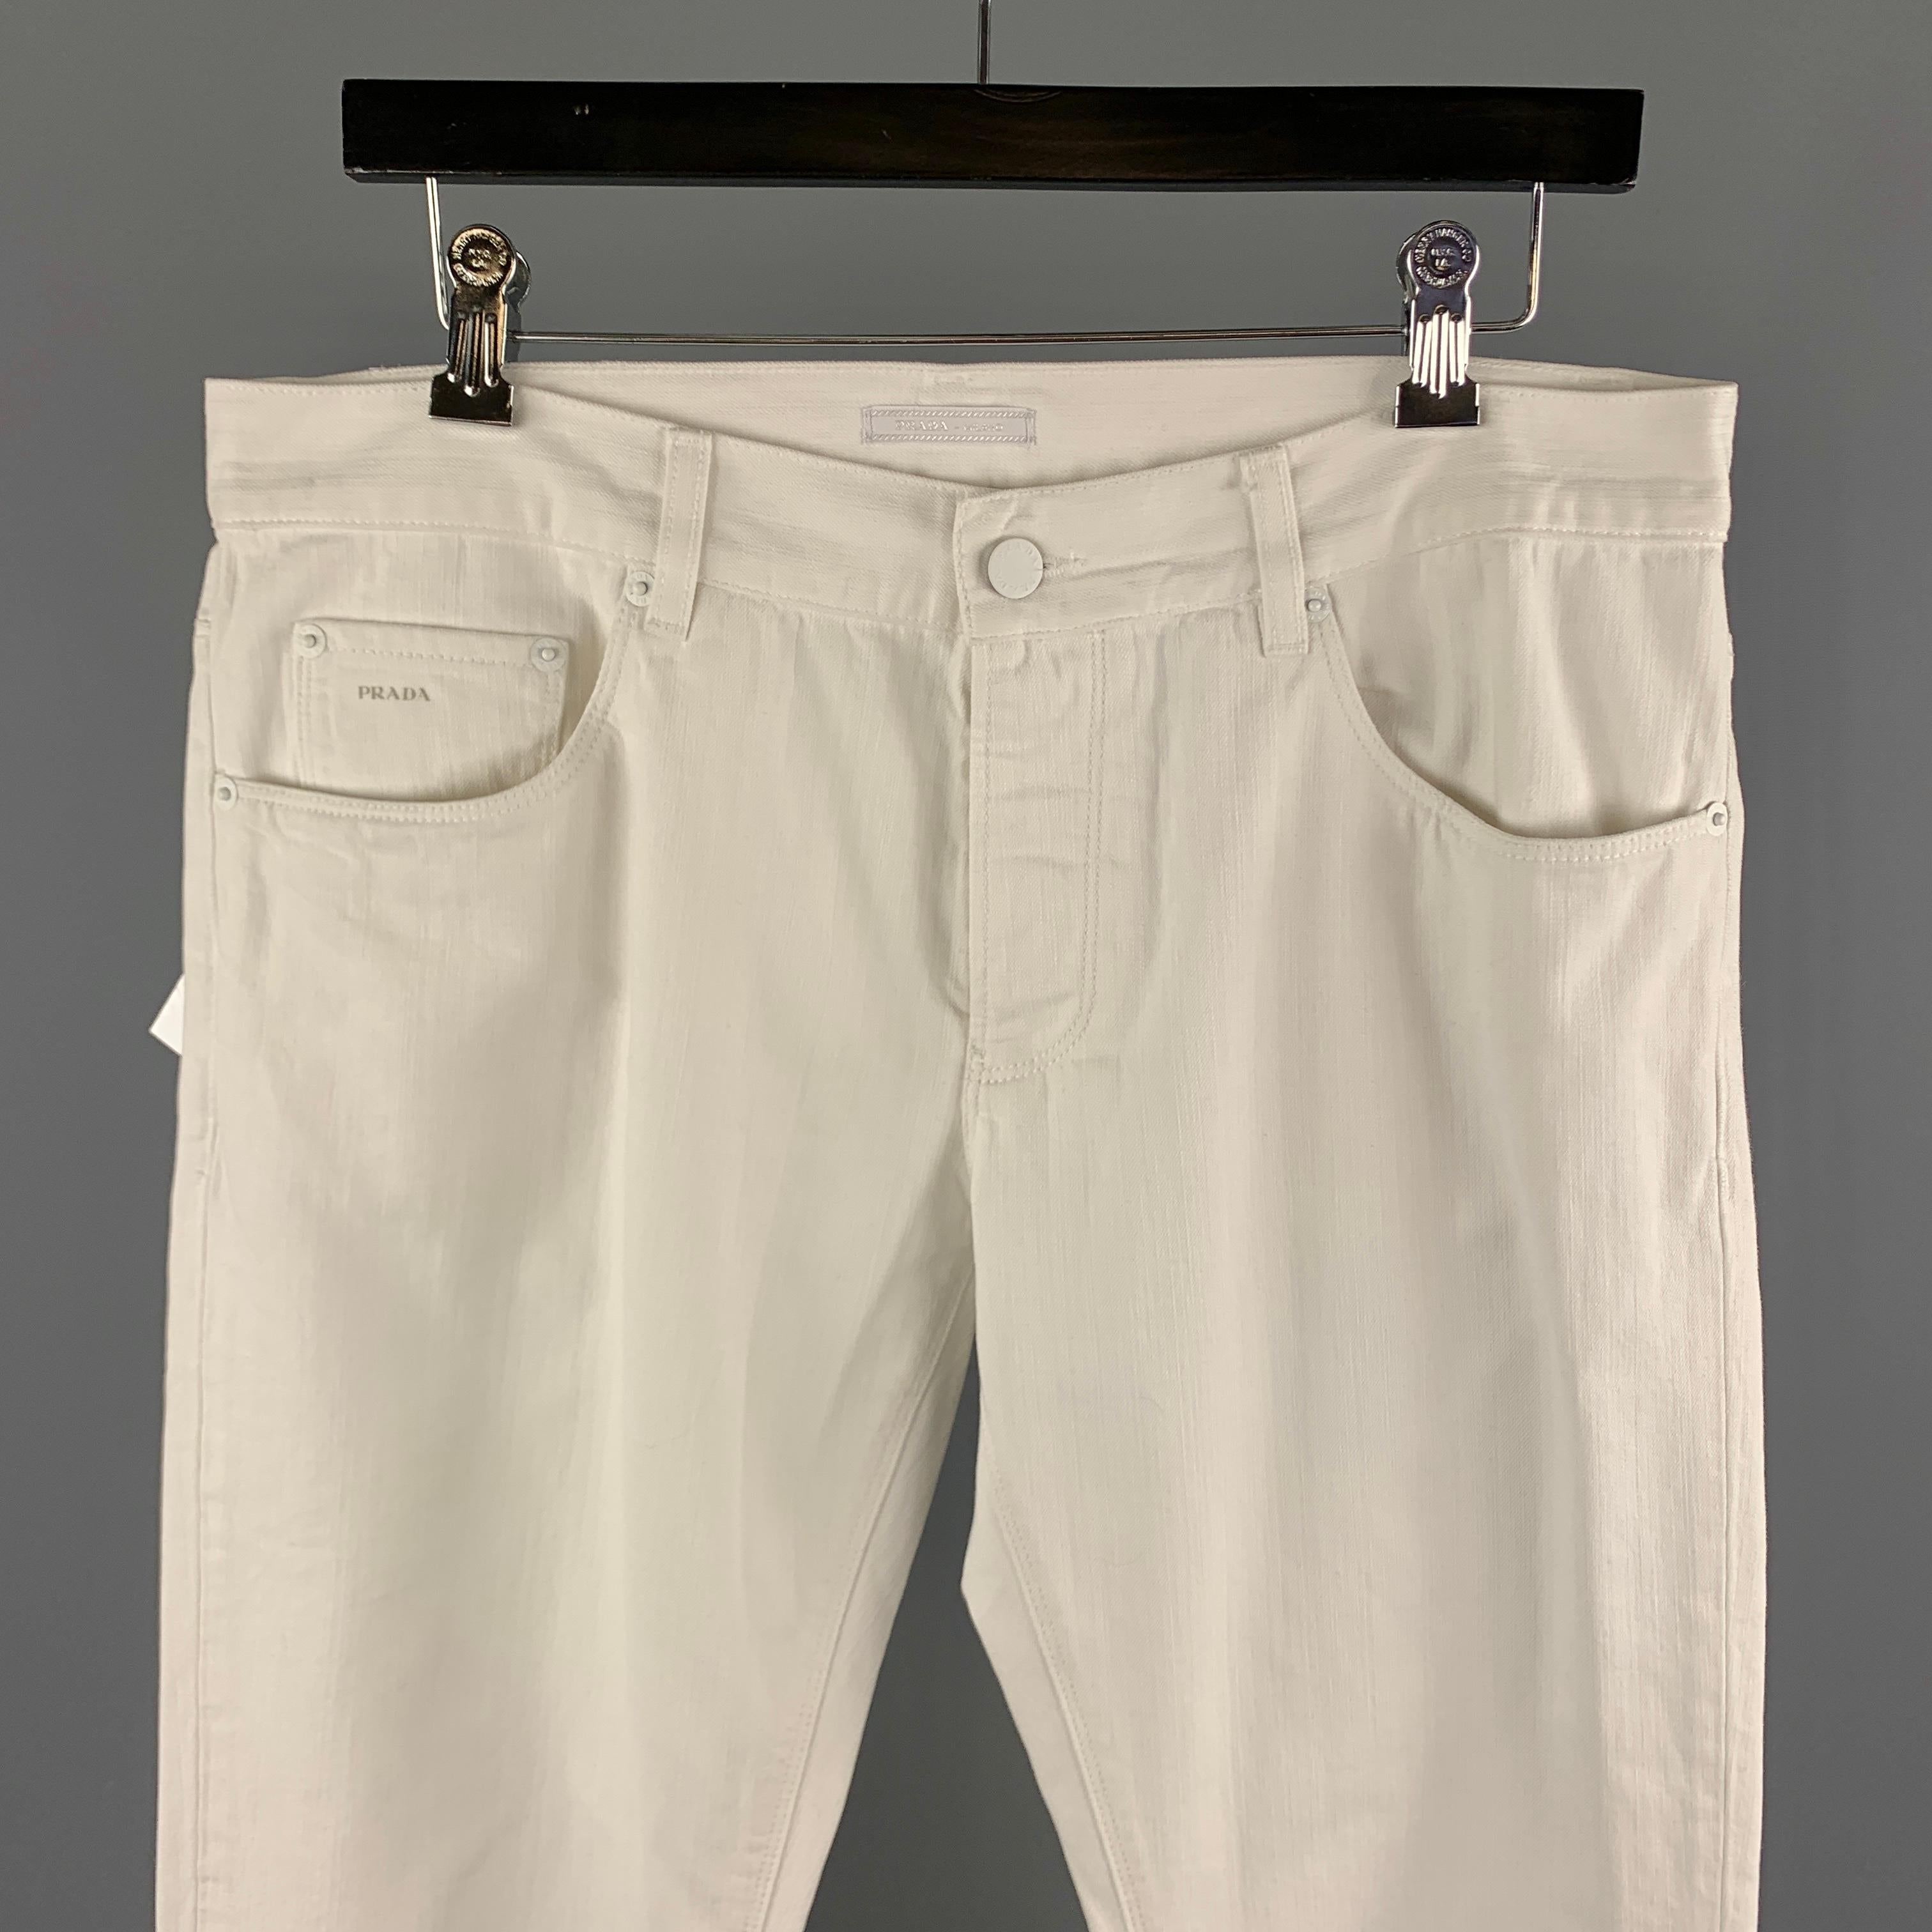 PRADA jeans comes in a white denim featuring a tapered fit and a button fly closure. Made in Romania. 

New With Tags.
Marked: 33

Measurements:

Waist: 33 in. 
Rise: 8 in. 
Inseam: 35 in. 